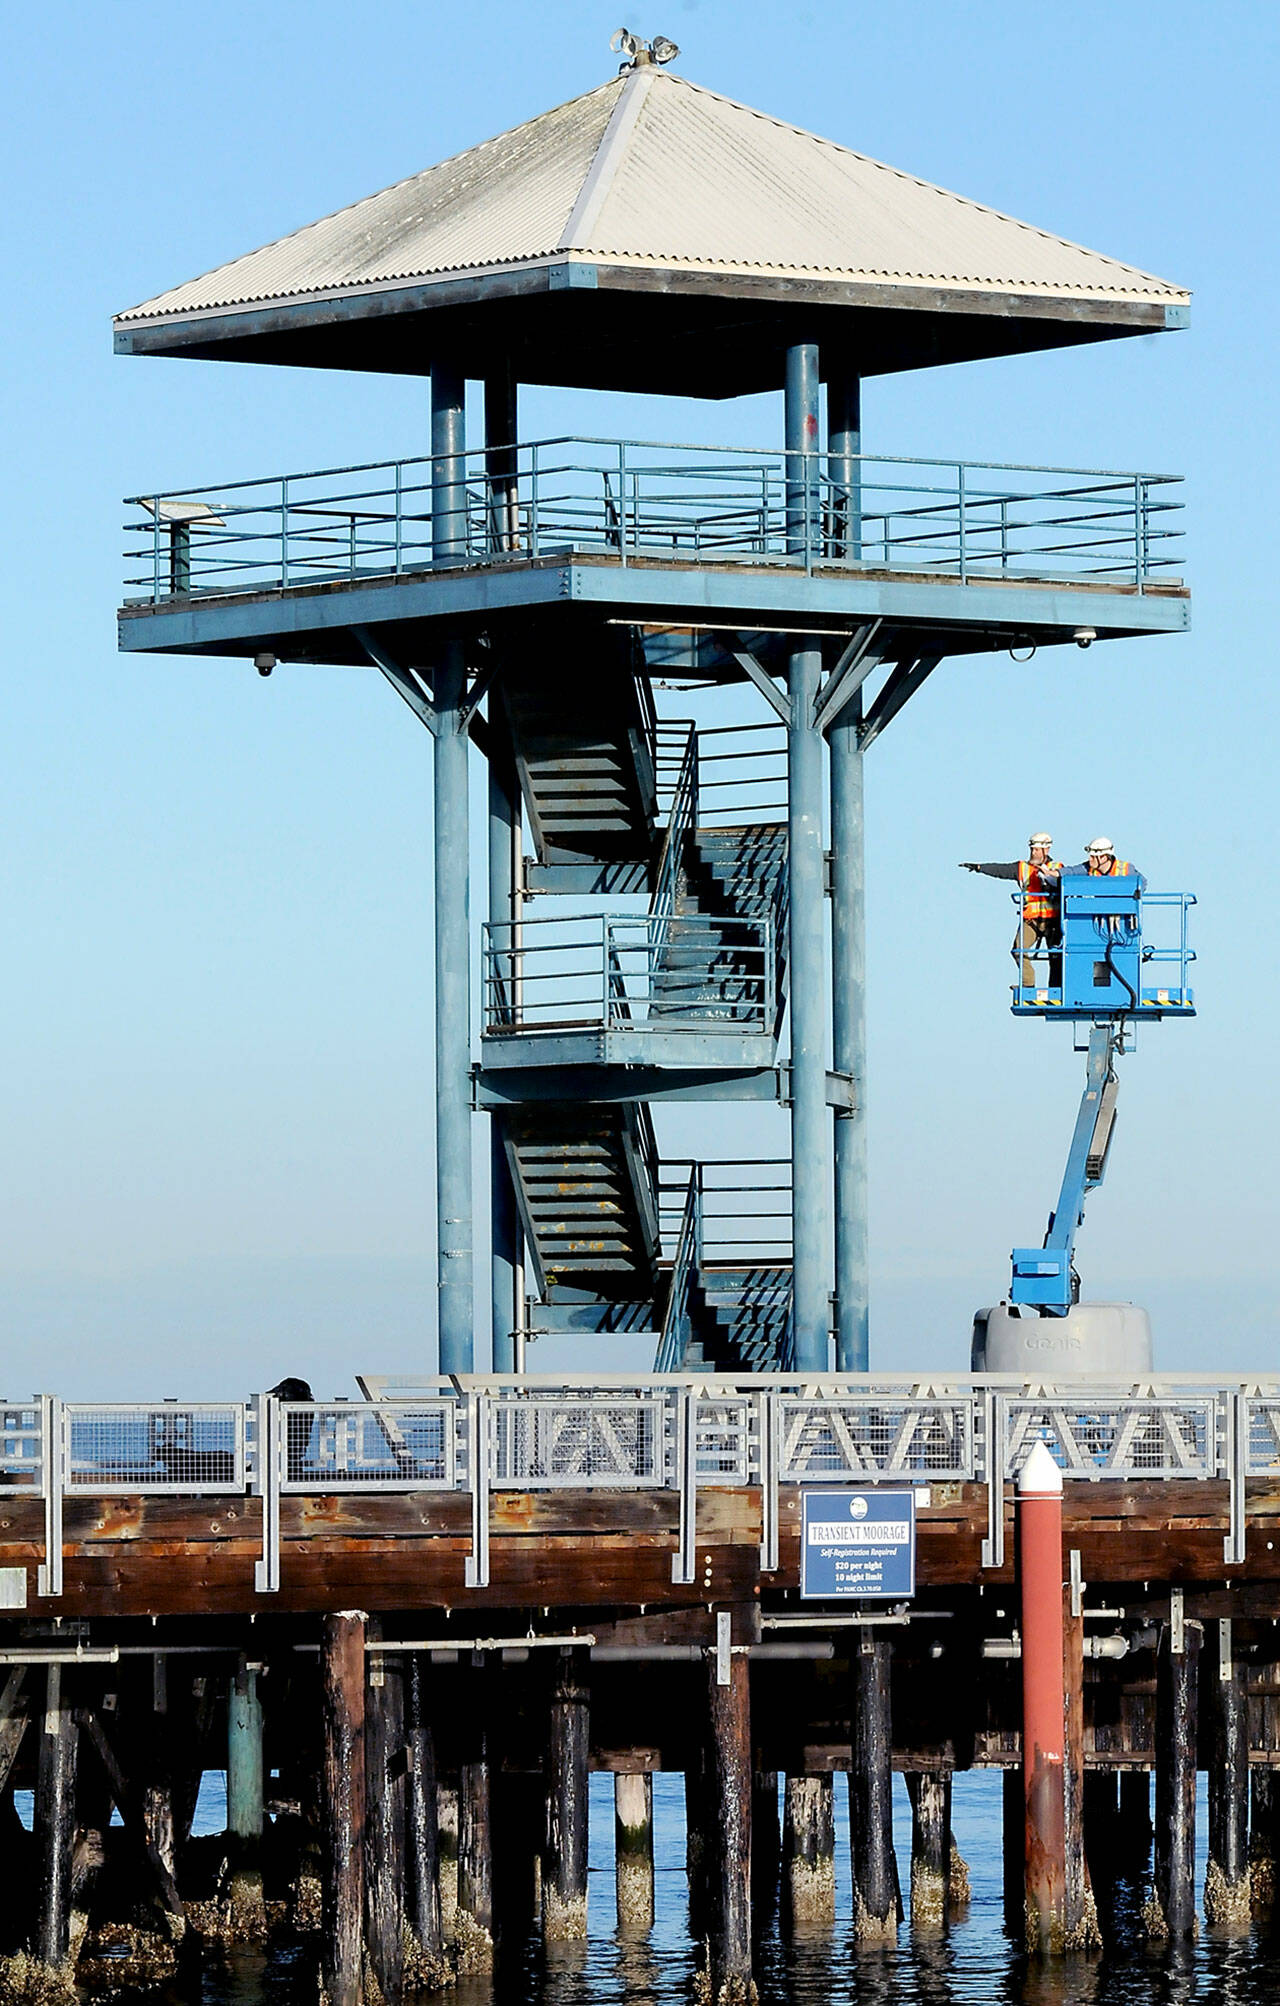 Craig Mallow, left, and Quinten Calquhoun of Olympia-based Sargent Engineers, Inc., use a lift to inspect the outside structure of the observation tower at the end of Port Angeles City Pier on Wednesday. (Keith Thorpe/Peninsula Daily News)